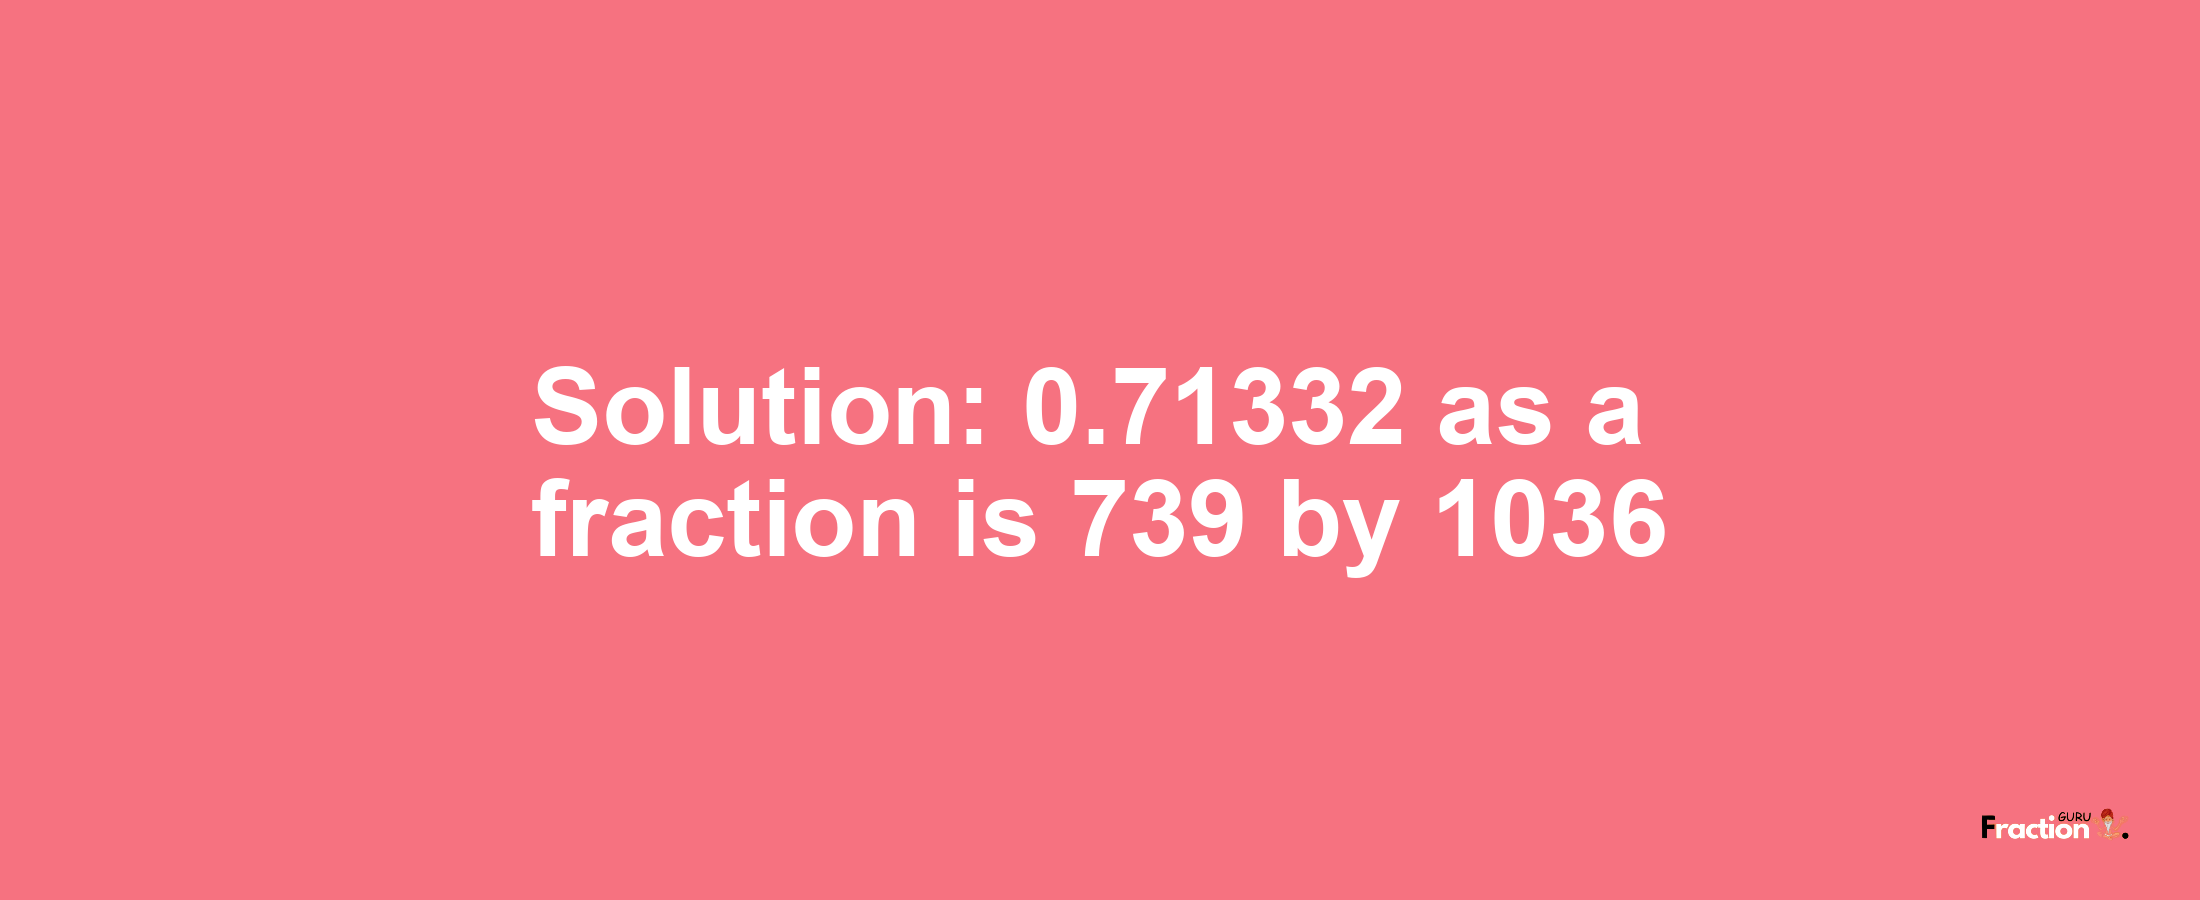 Solution:0.71332 as a fraction is 739/1036